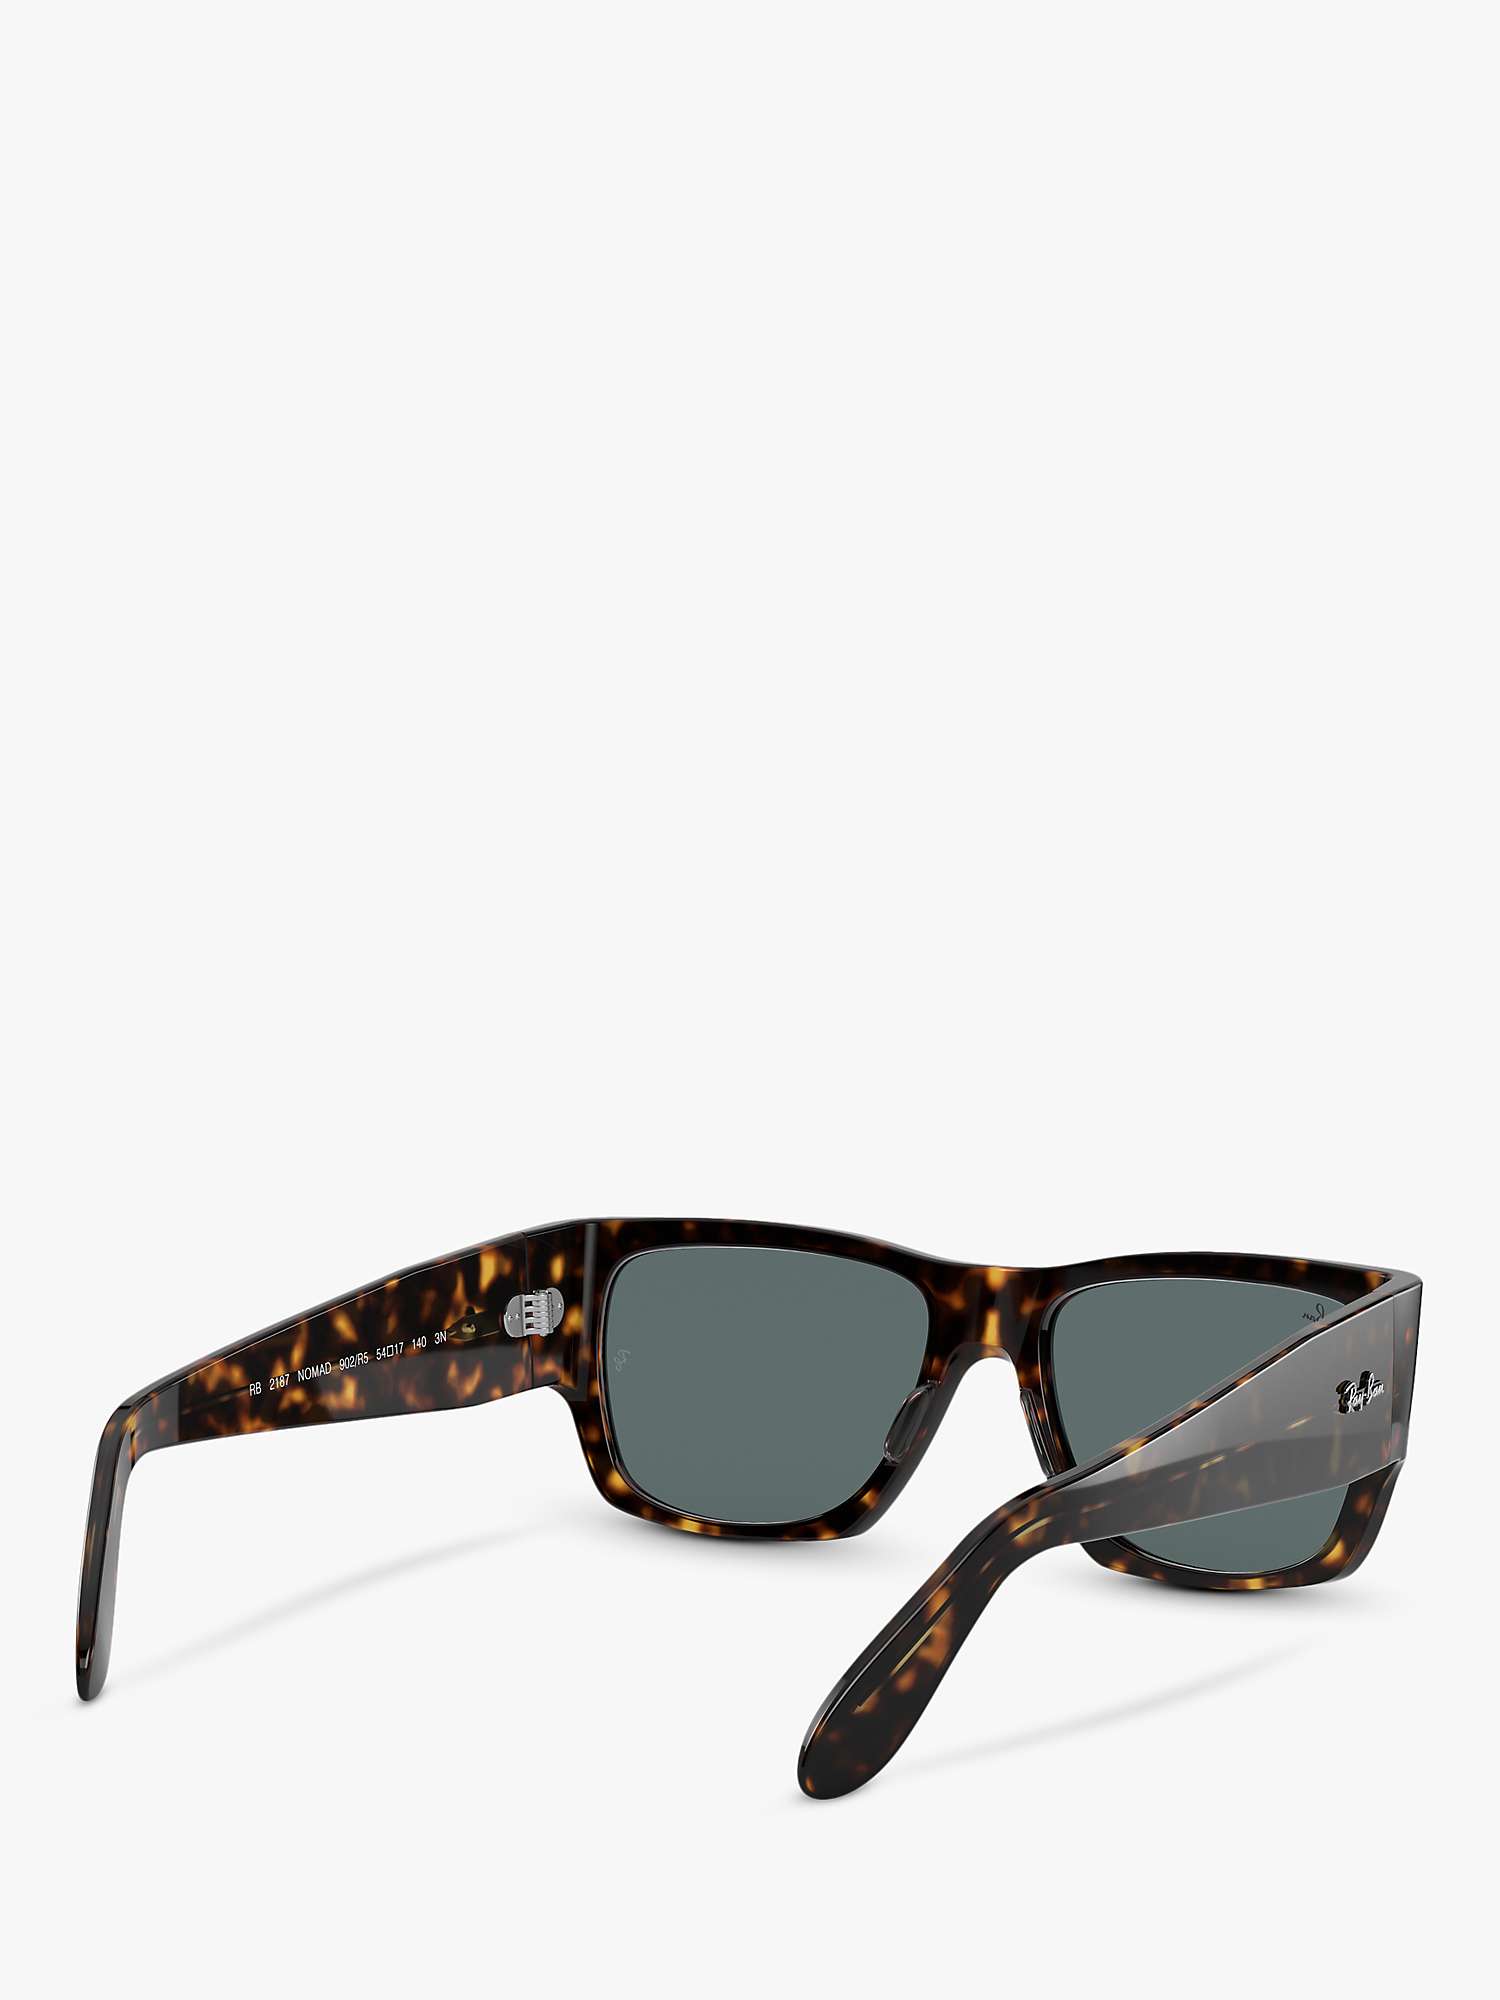 Buy Ray-Ban RB2187 Unisex Square Sunglasses Online at johnlewis.com